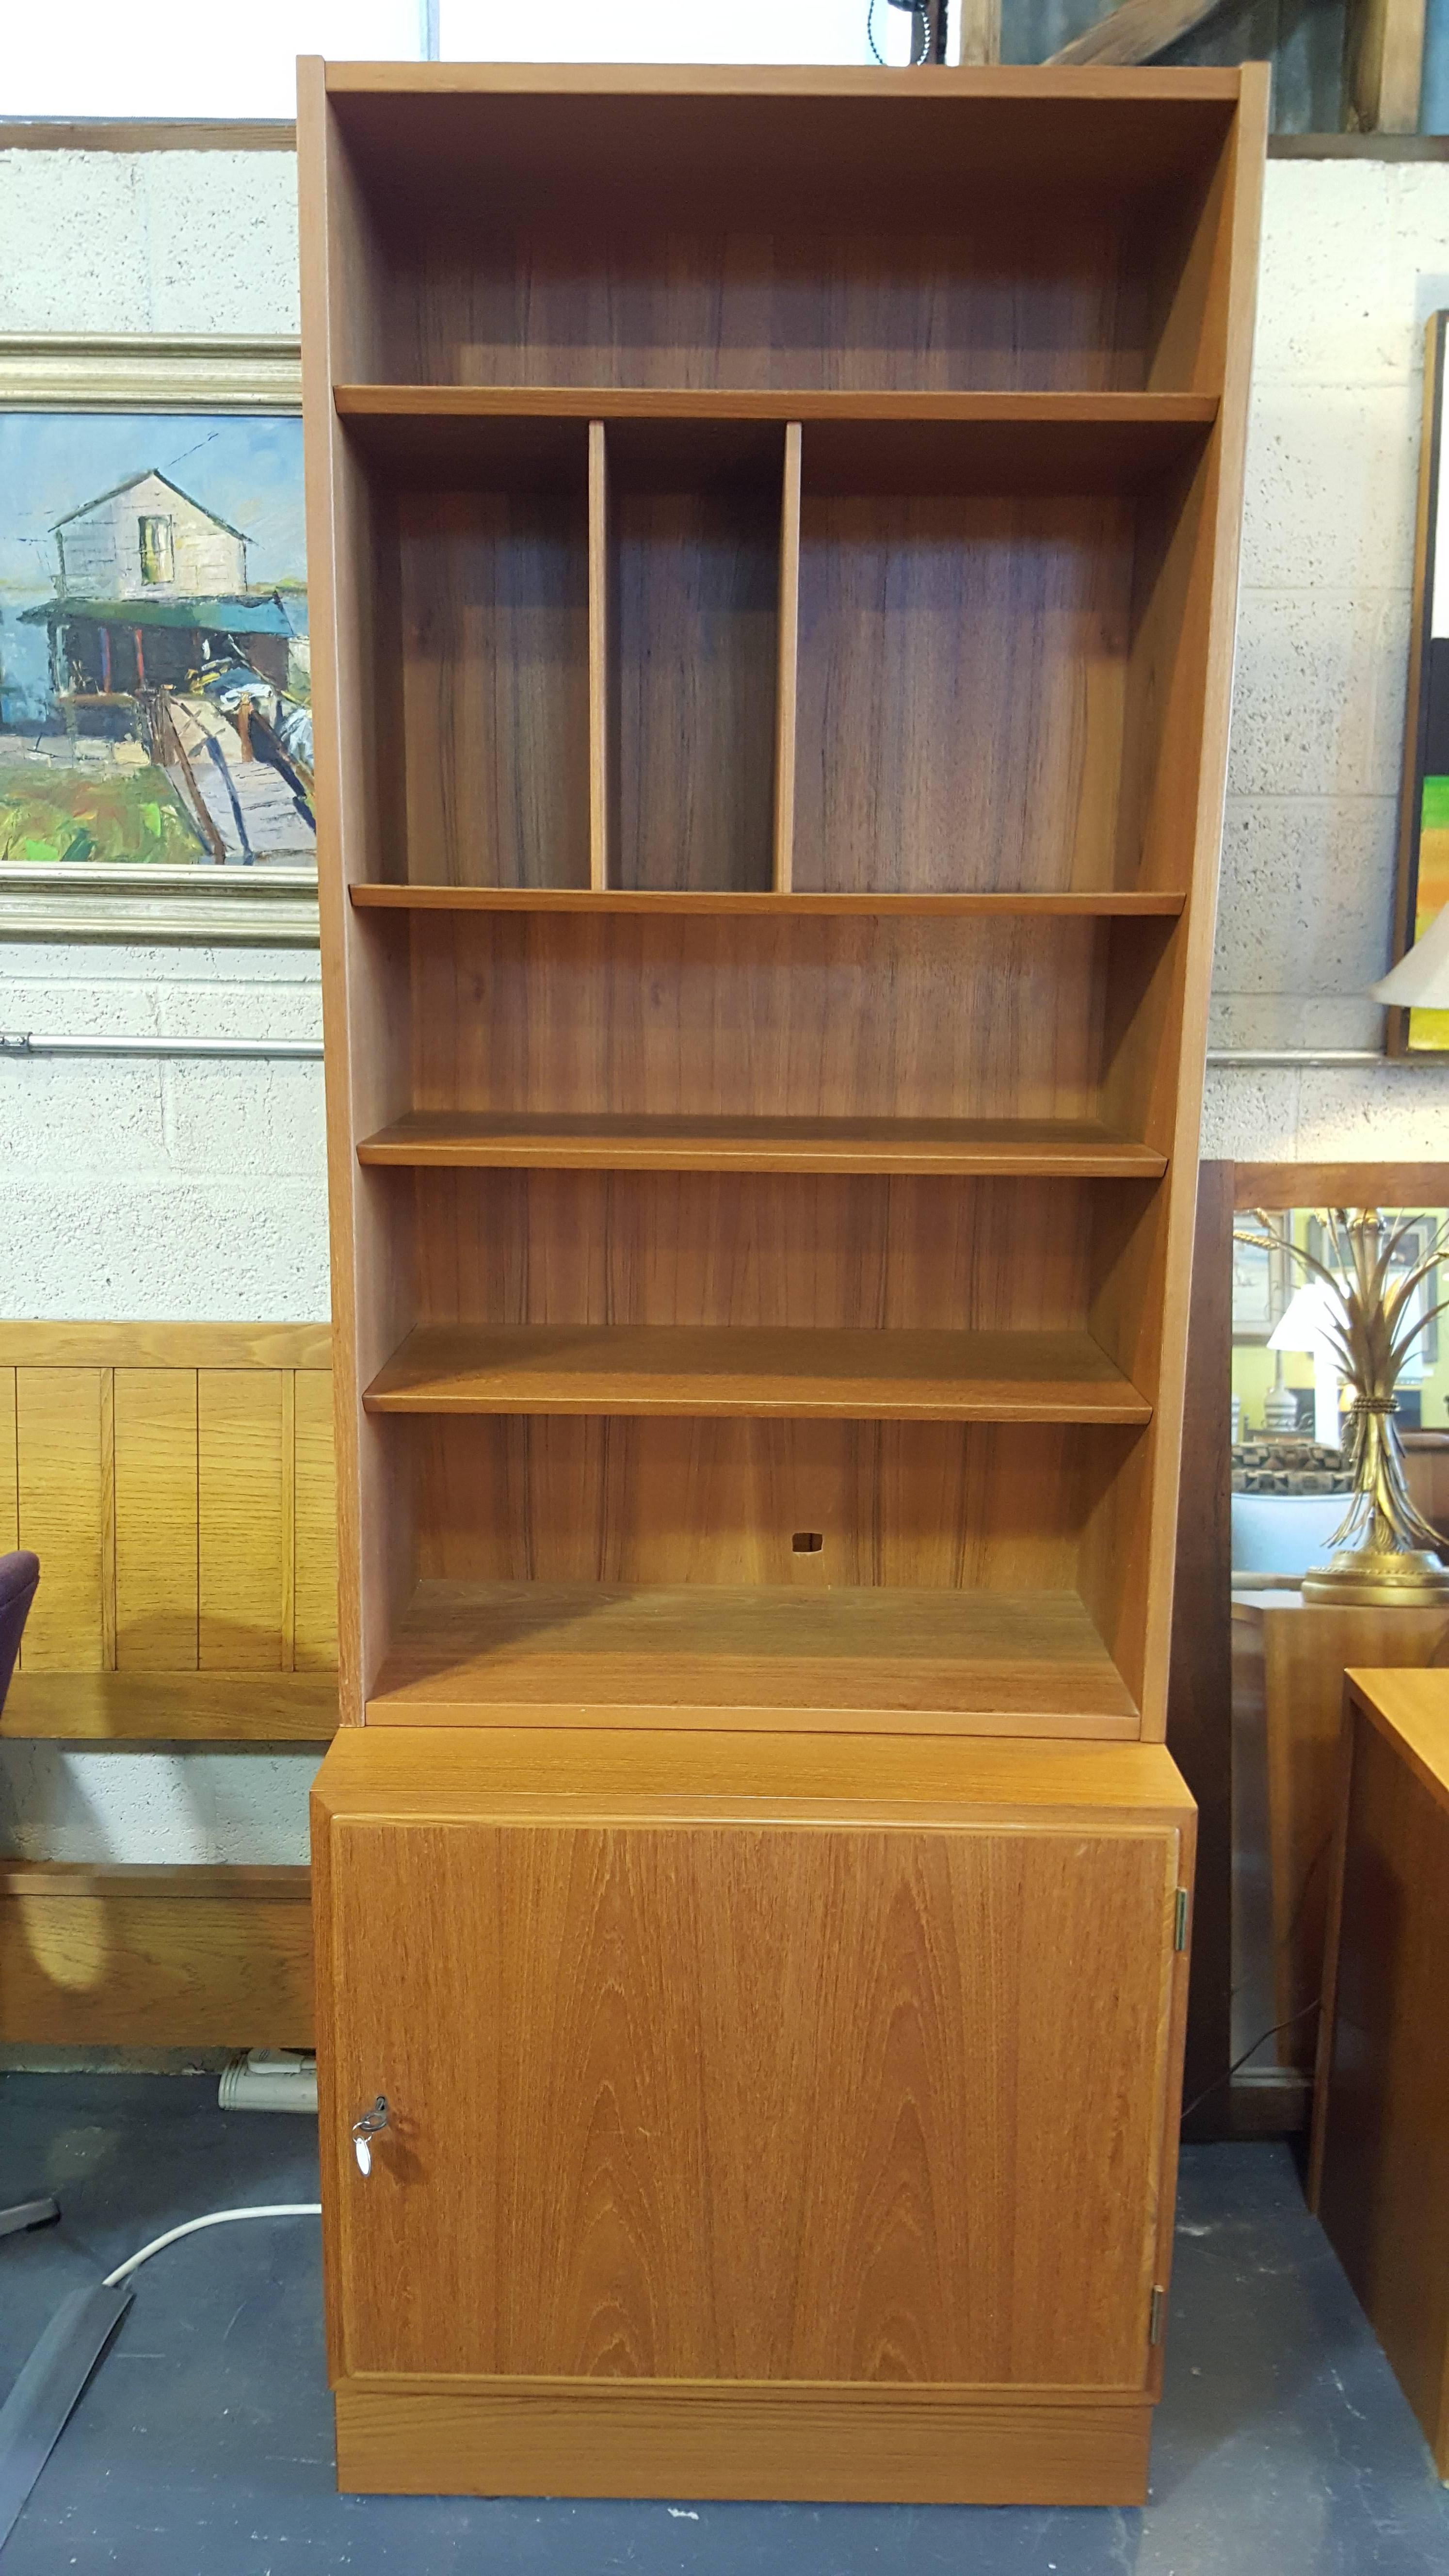 A two-piece teak storage cabinet or bookcase designed by Poul Hundevad, circa 1970. Ample storage with a small footprint. Top portion lifts off, therefore, lower cabinet may be used separately as top finish is in excellent condition. Lower cabinet